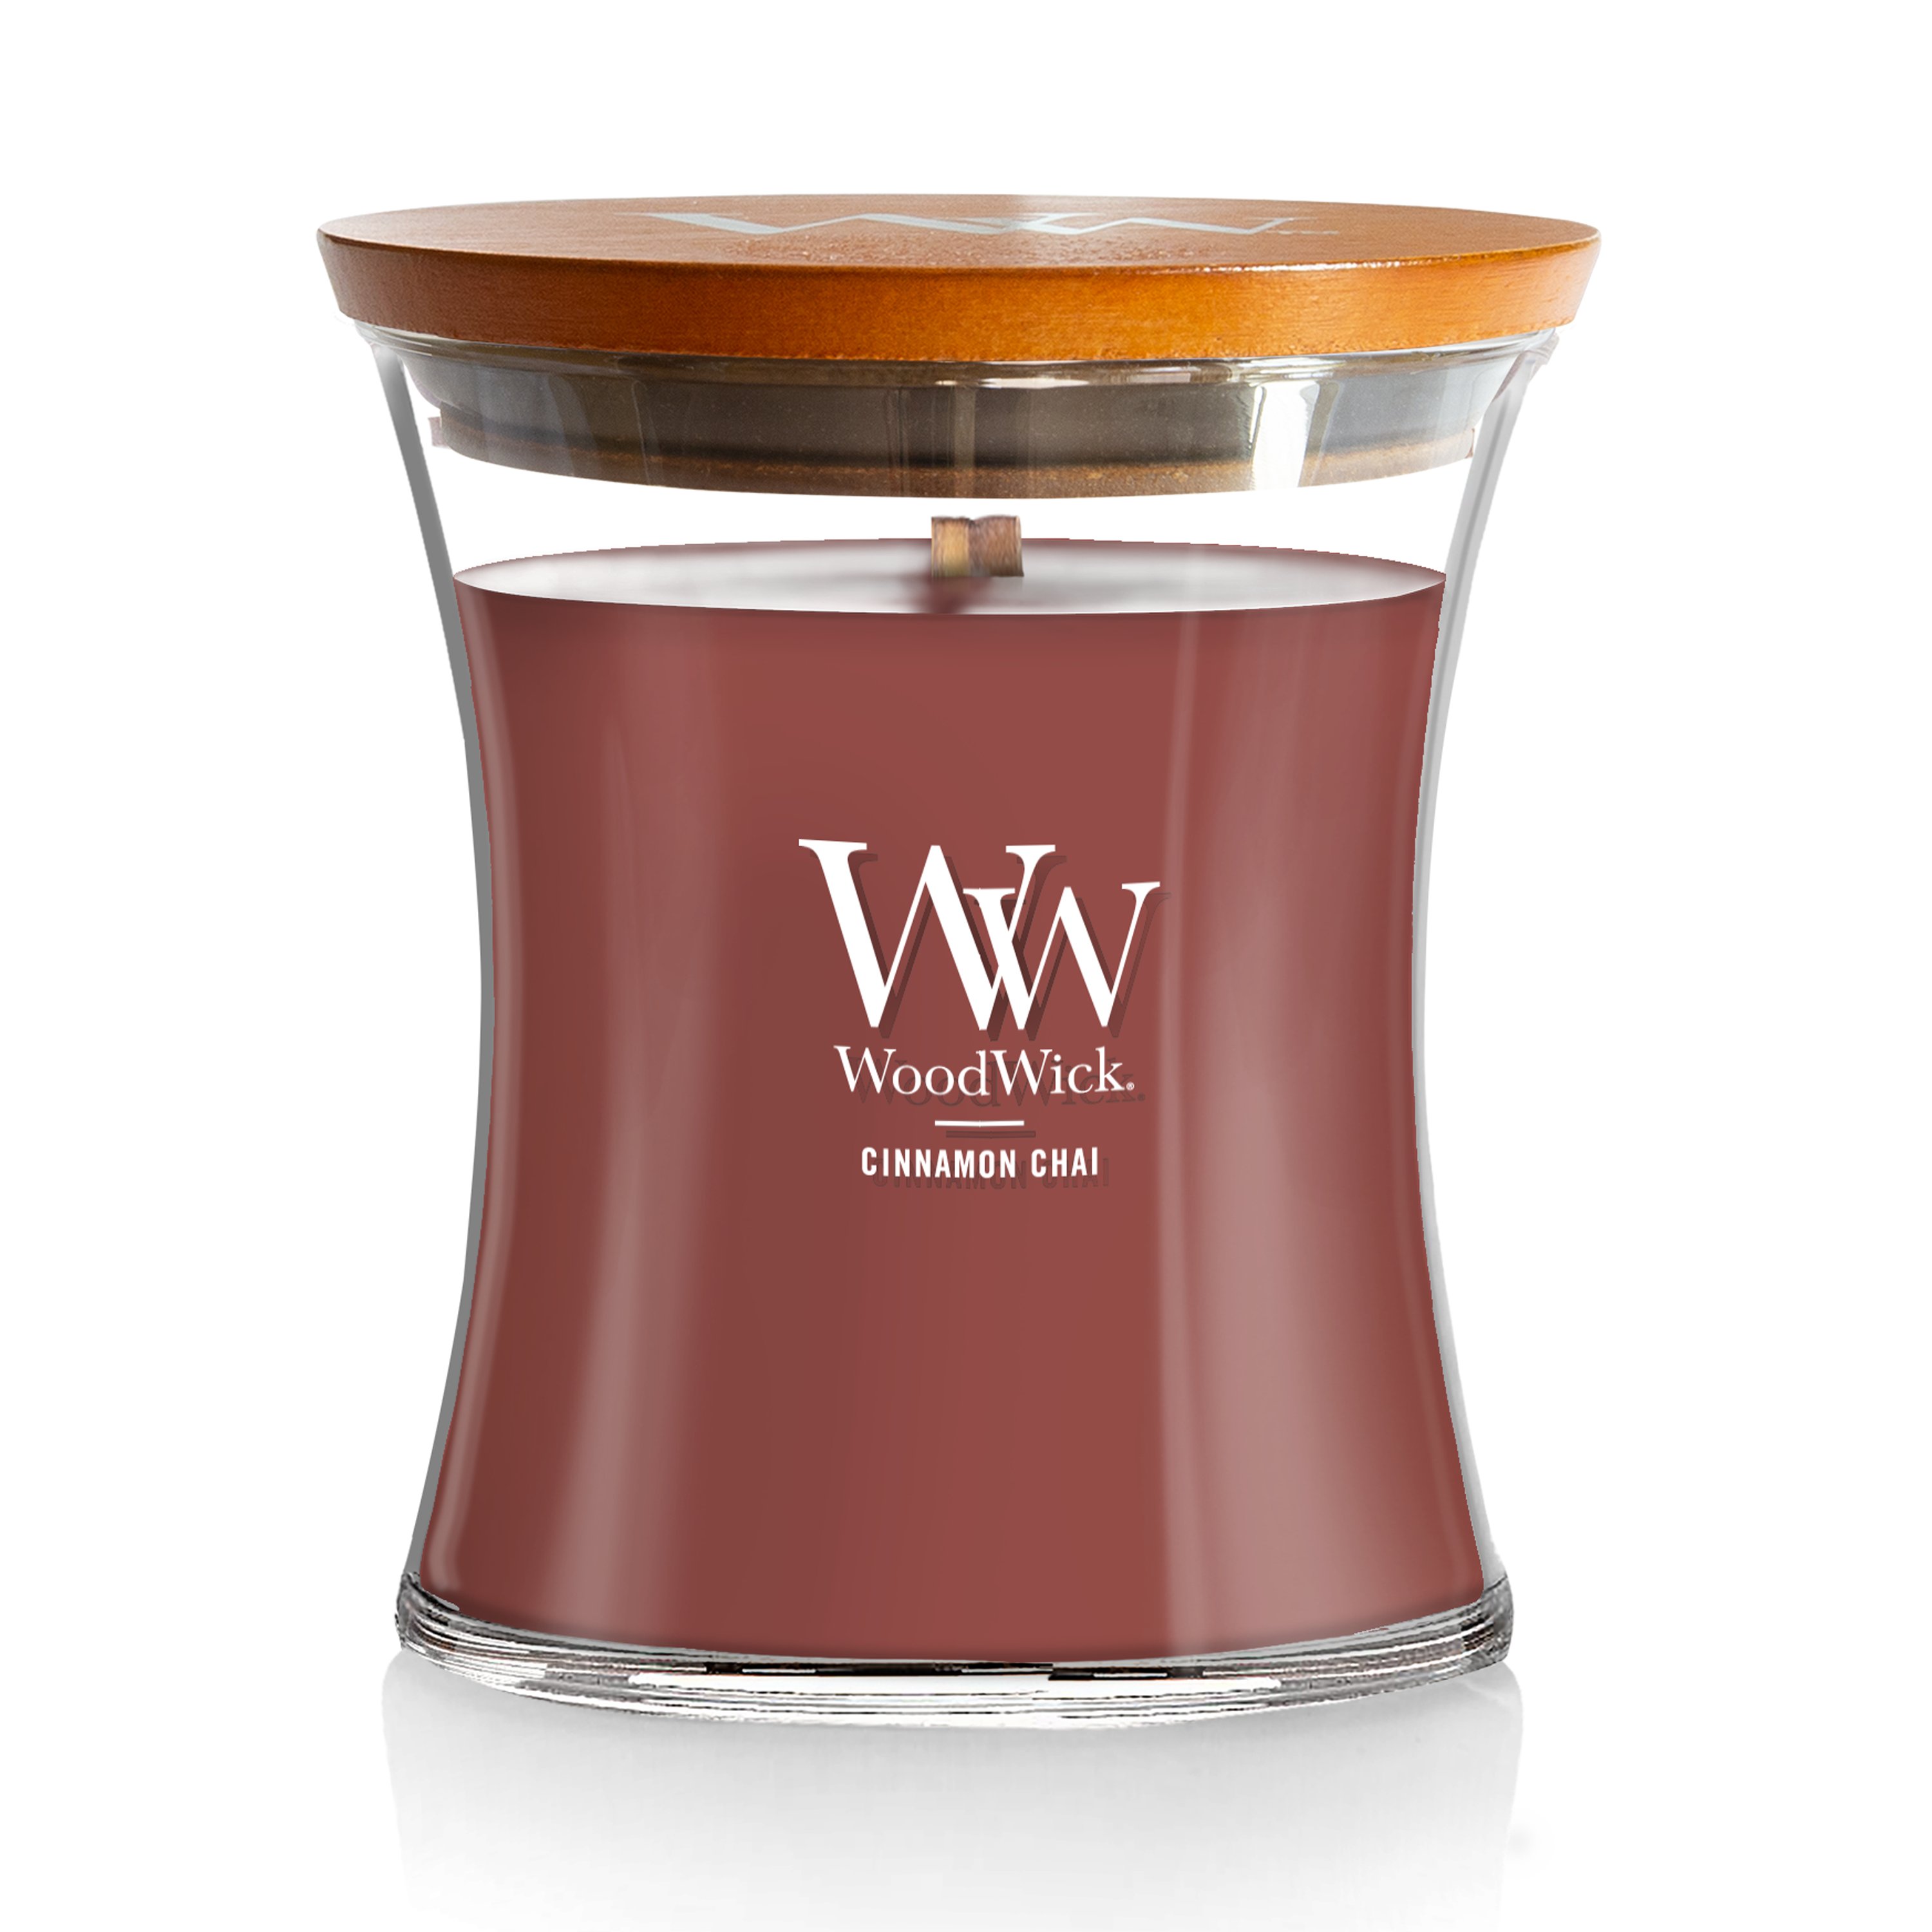  Woodwick Medium Hourglass Scented Candle with